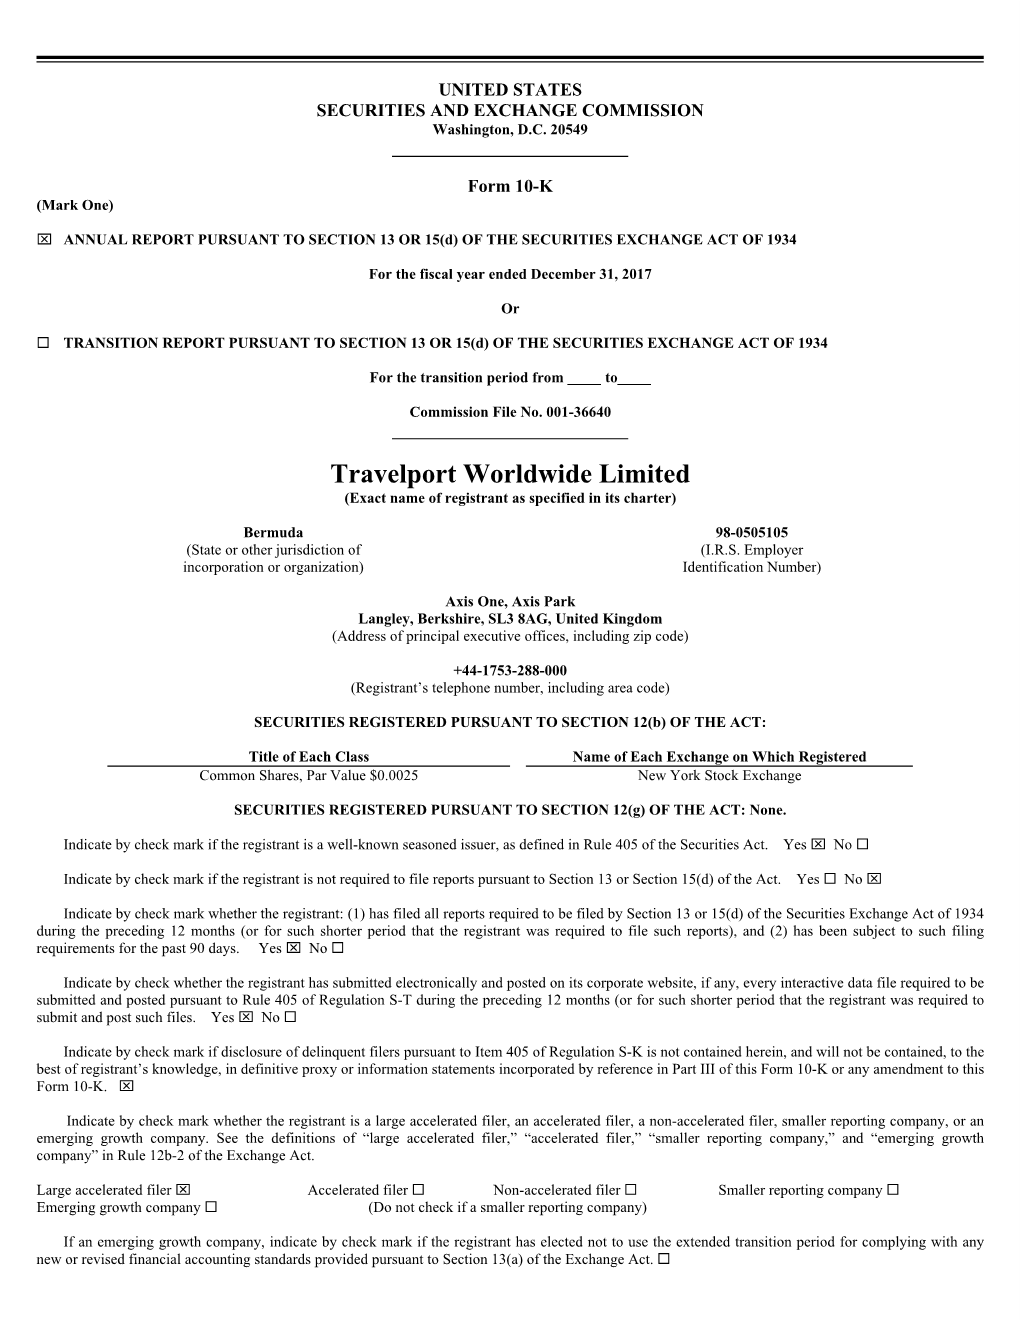 Travelport Worldwide Limited (Exact Name of Registrant As Specified in Its Charter)